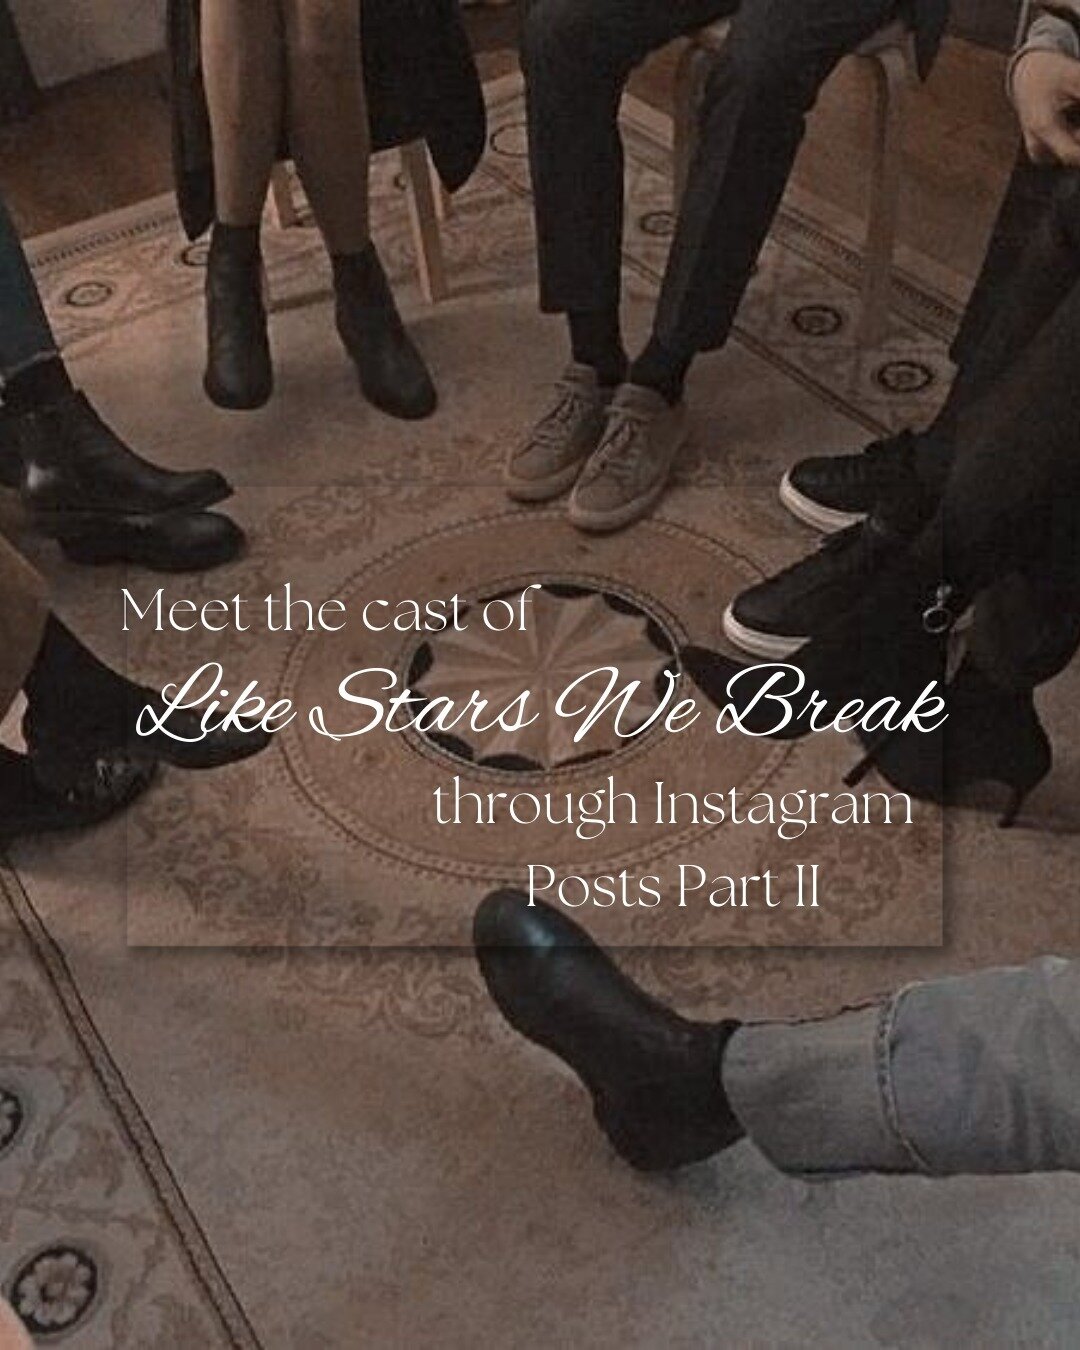 MEET THE CAST OF &quot;LIKE STARS WE BREAK&quot; THROUGH INSTAGRAM PART II~
So earlier on I posted Instagram account edits for each of my characters (The main cast) to sort of introduce them. Here are the individual Instagram posts from the character